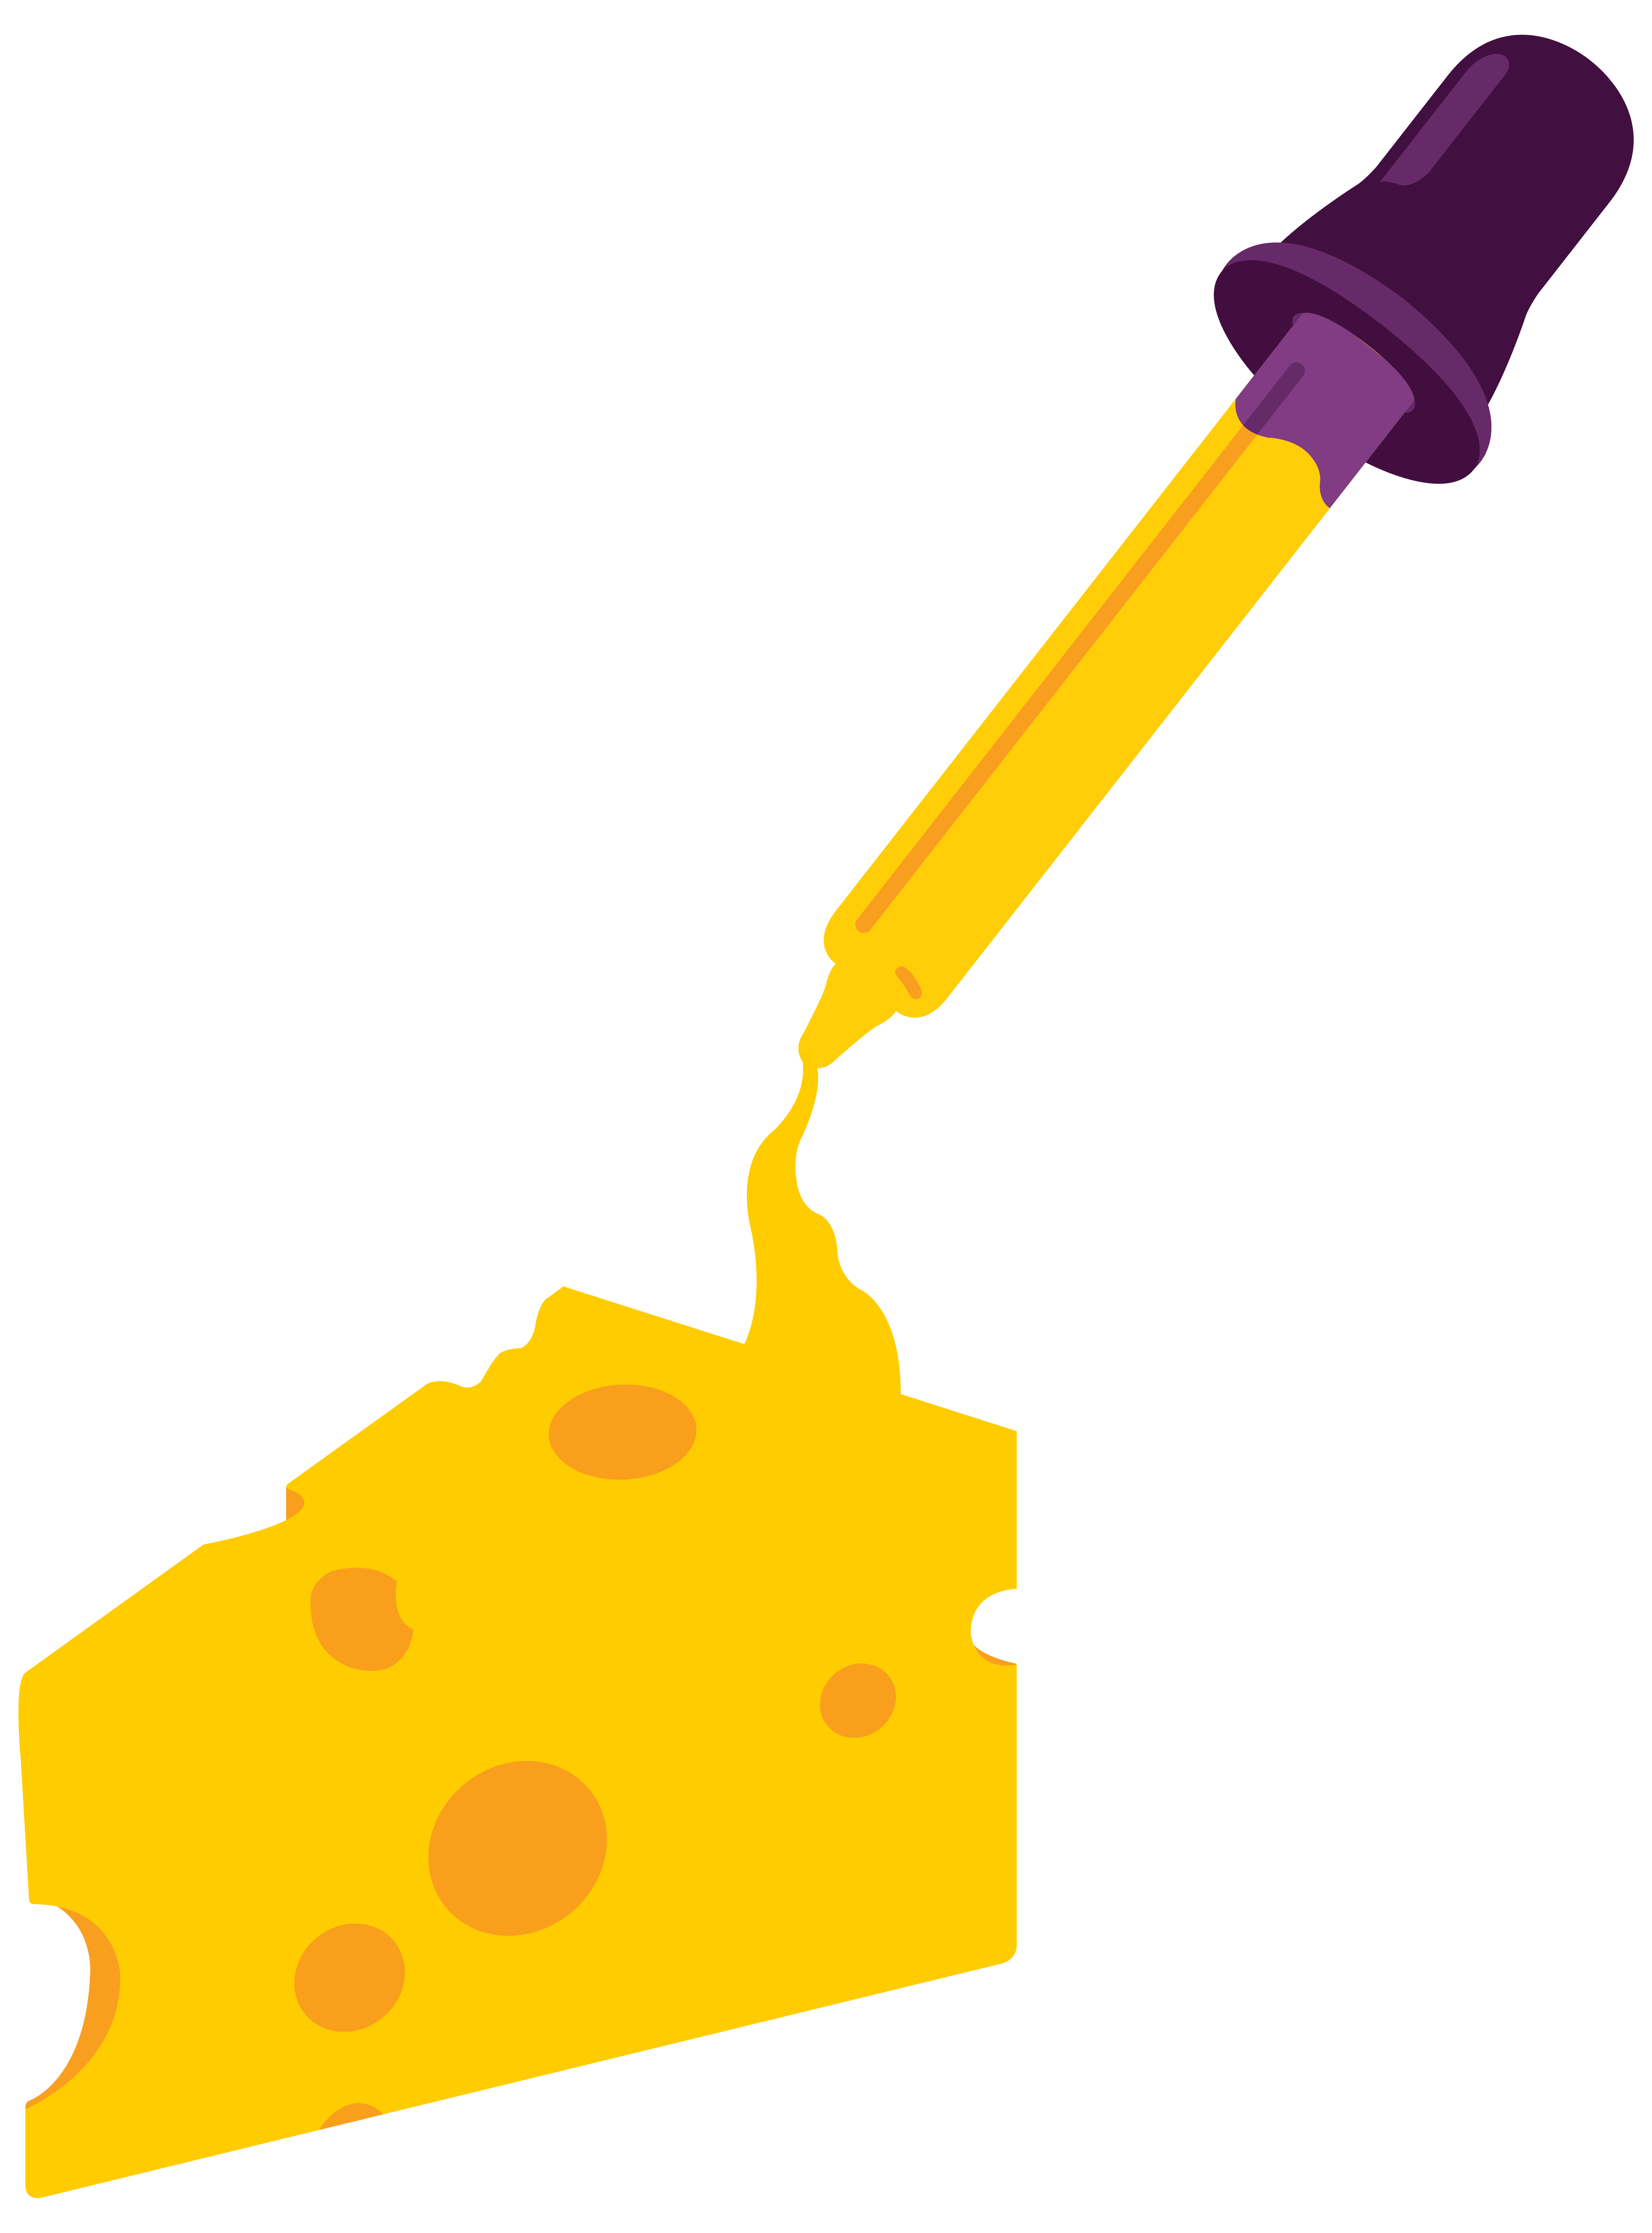 Cheese coming out of a pipet